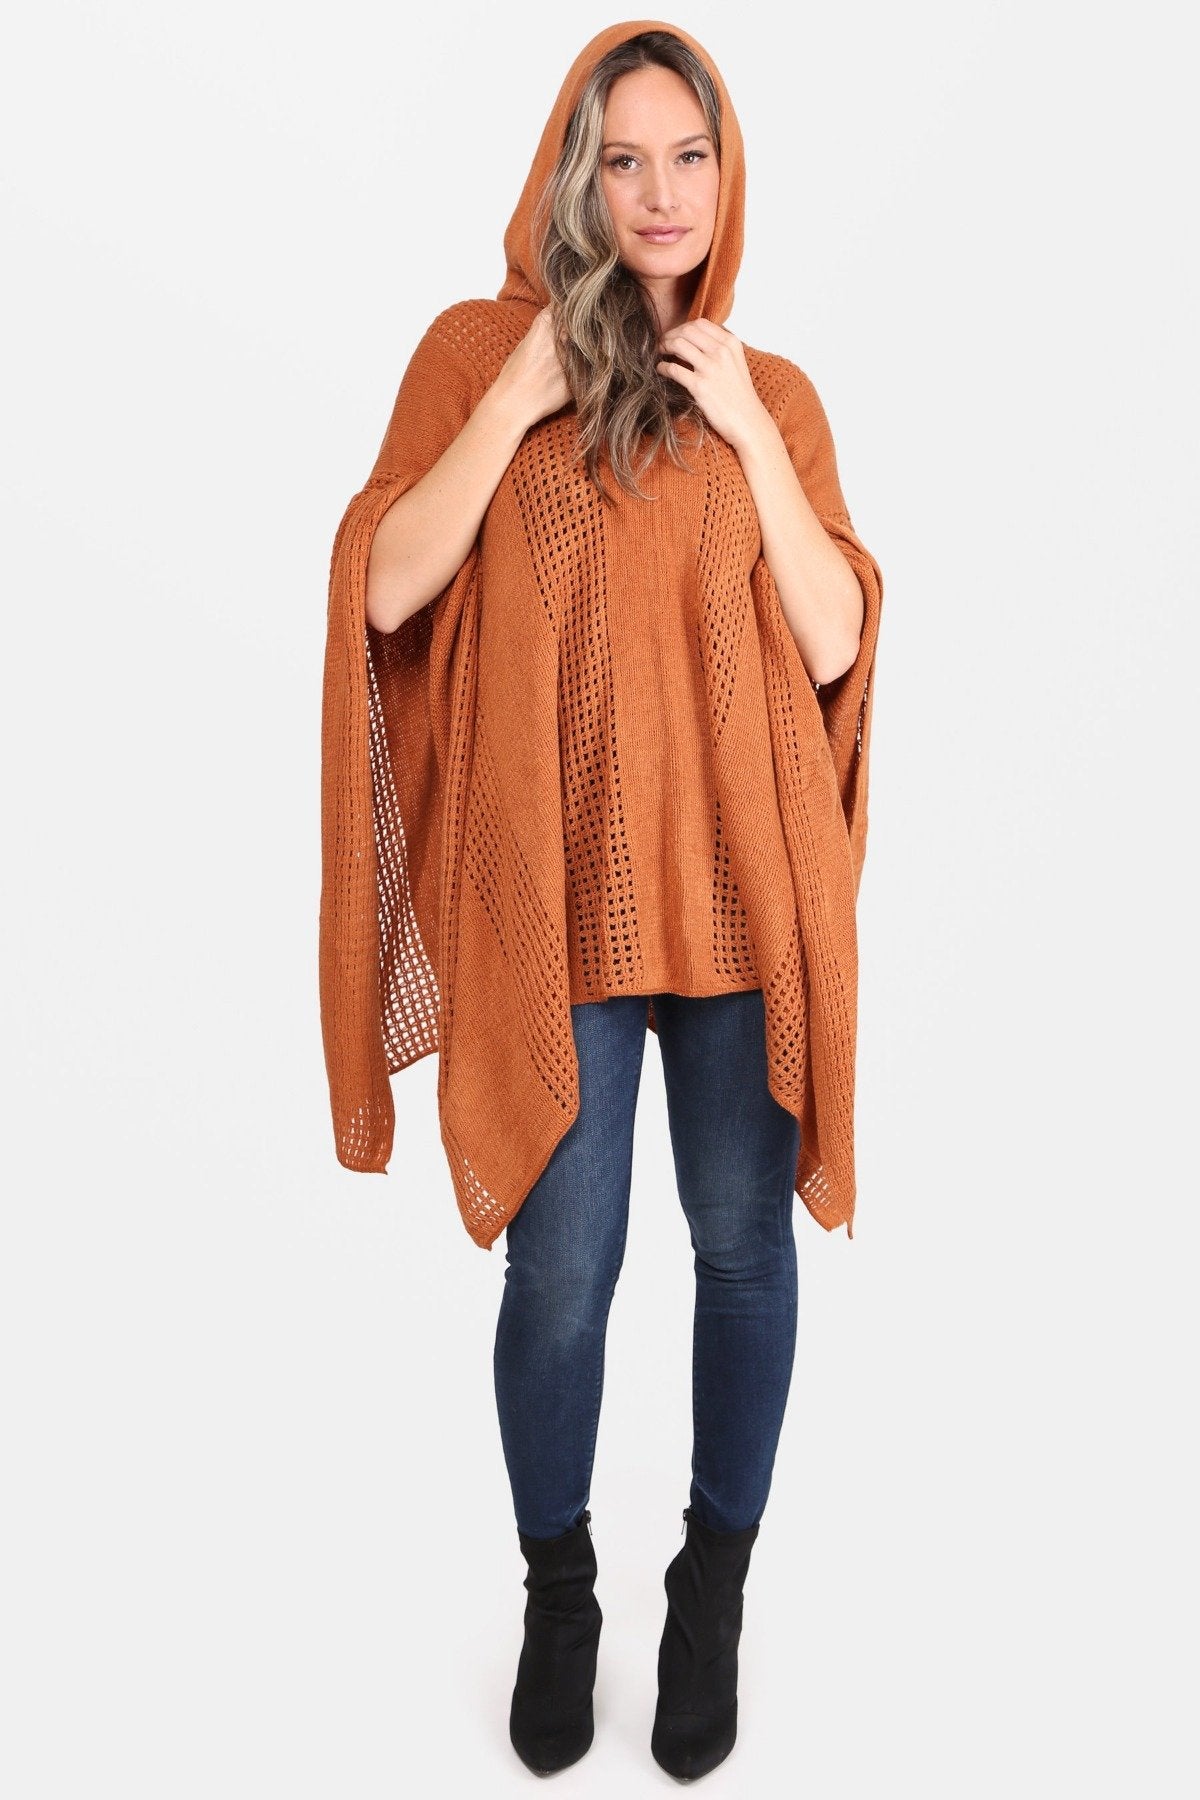 Solid Color Hollow Knitted Poncho W/ Hood